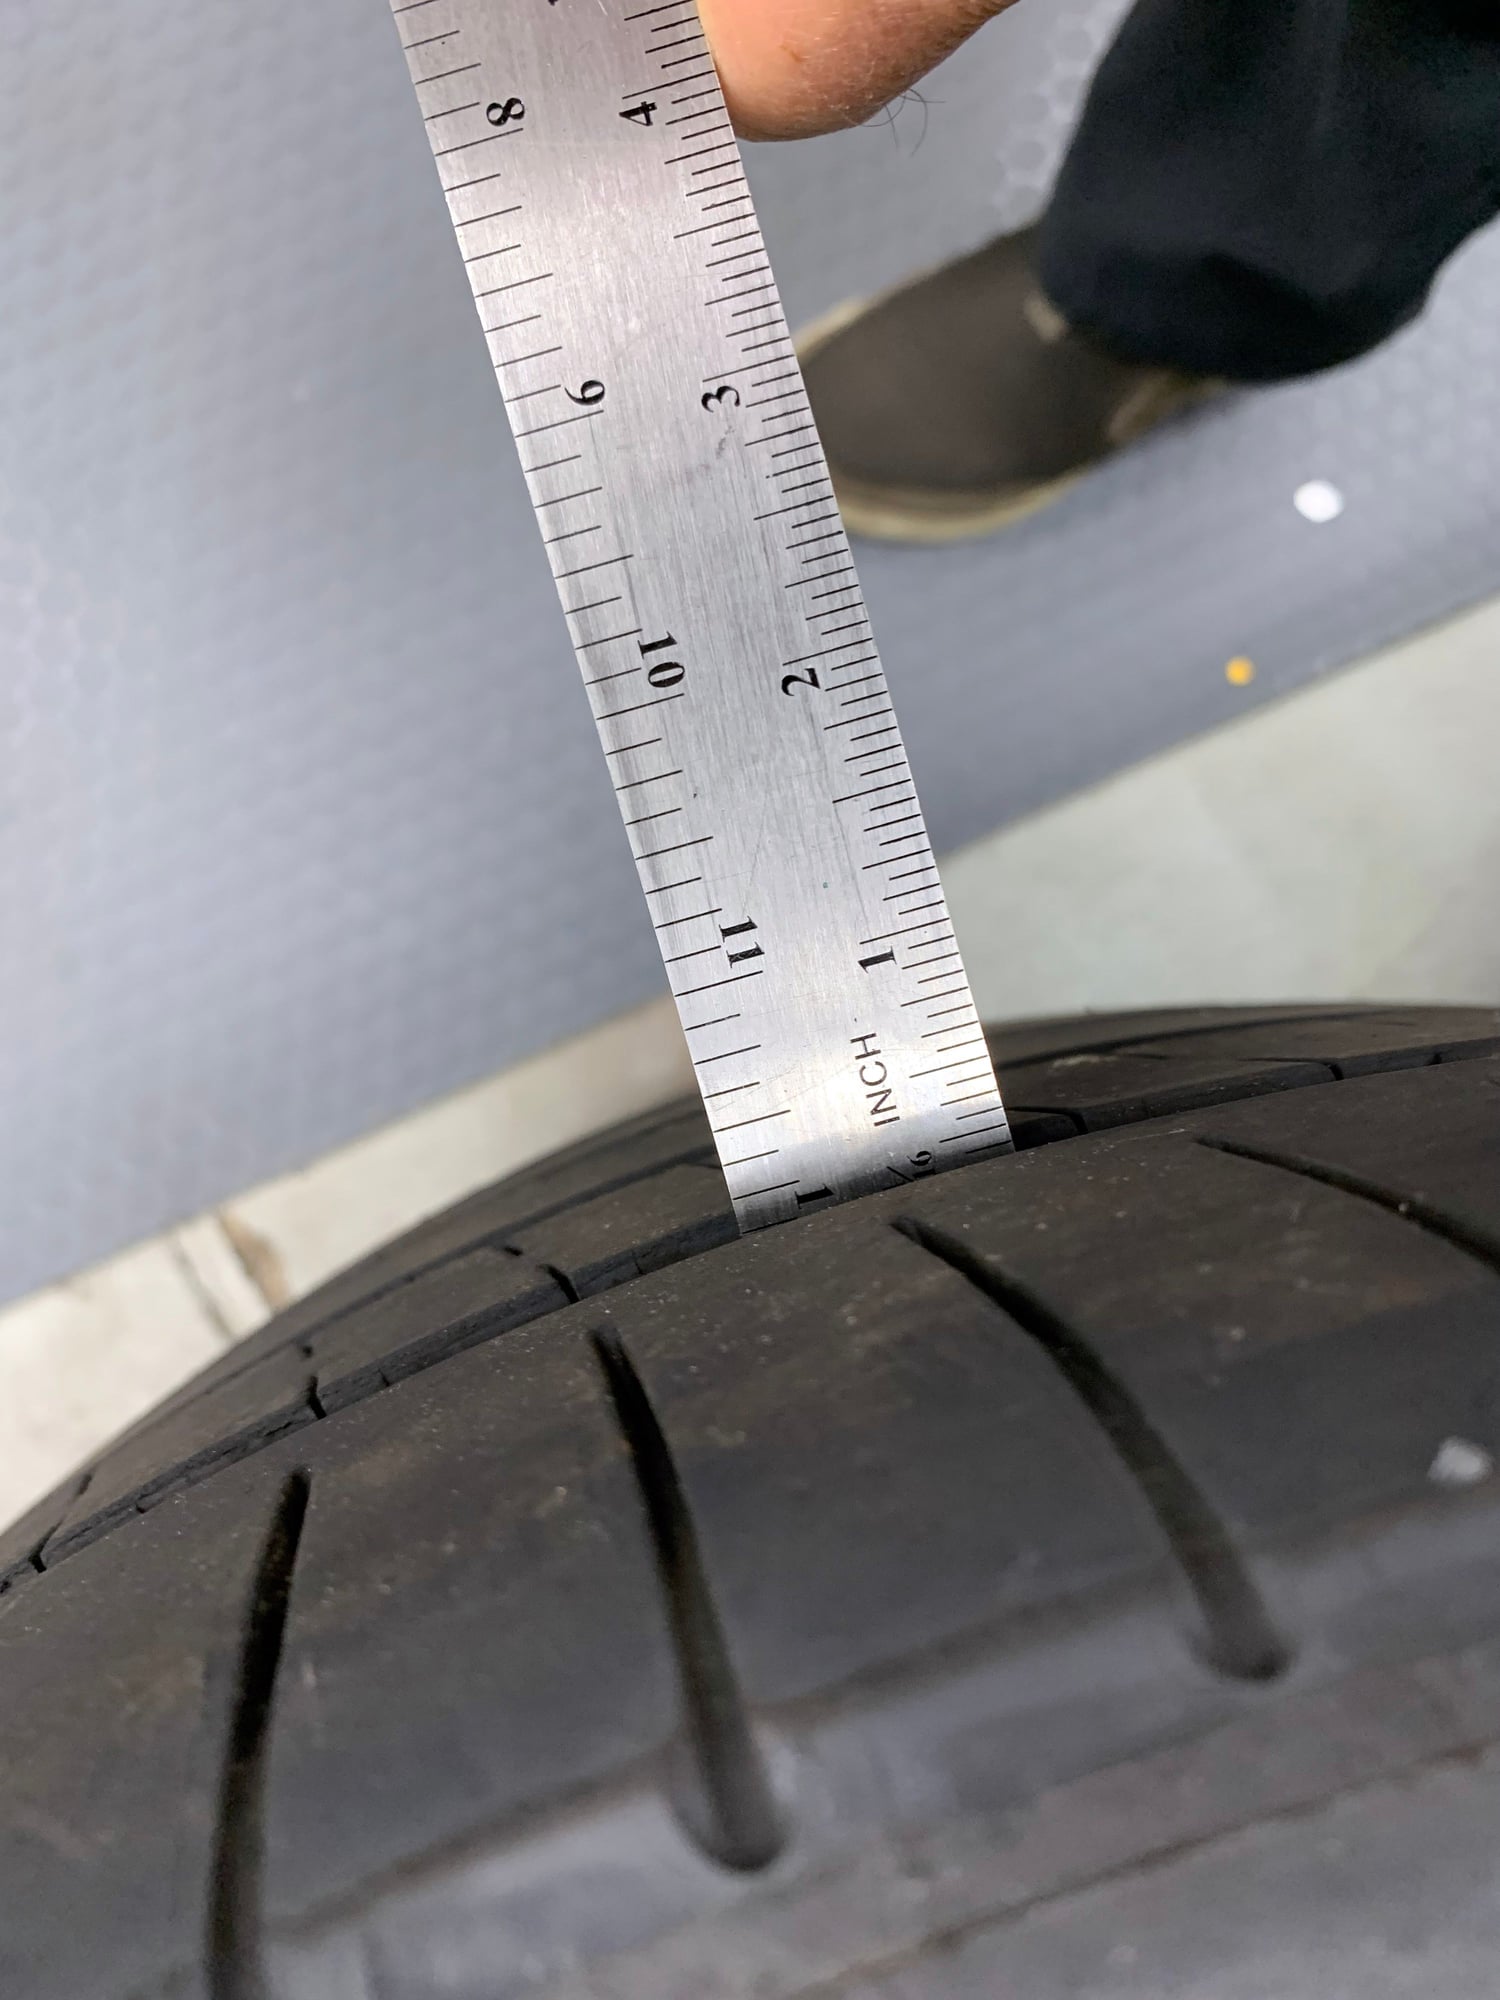 Wheels and Tires/Axles - Set of Michelin Pilot Super Sport Tires for Sale - Used - 1996 to 2021 Any Make All Models - Fairfield, NJ 07004, United States